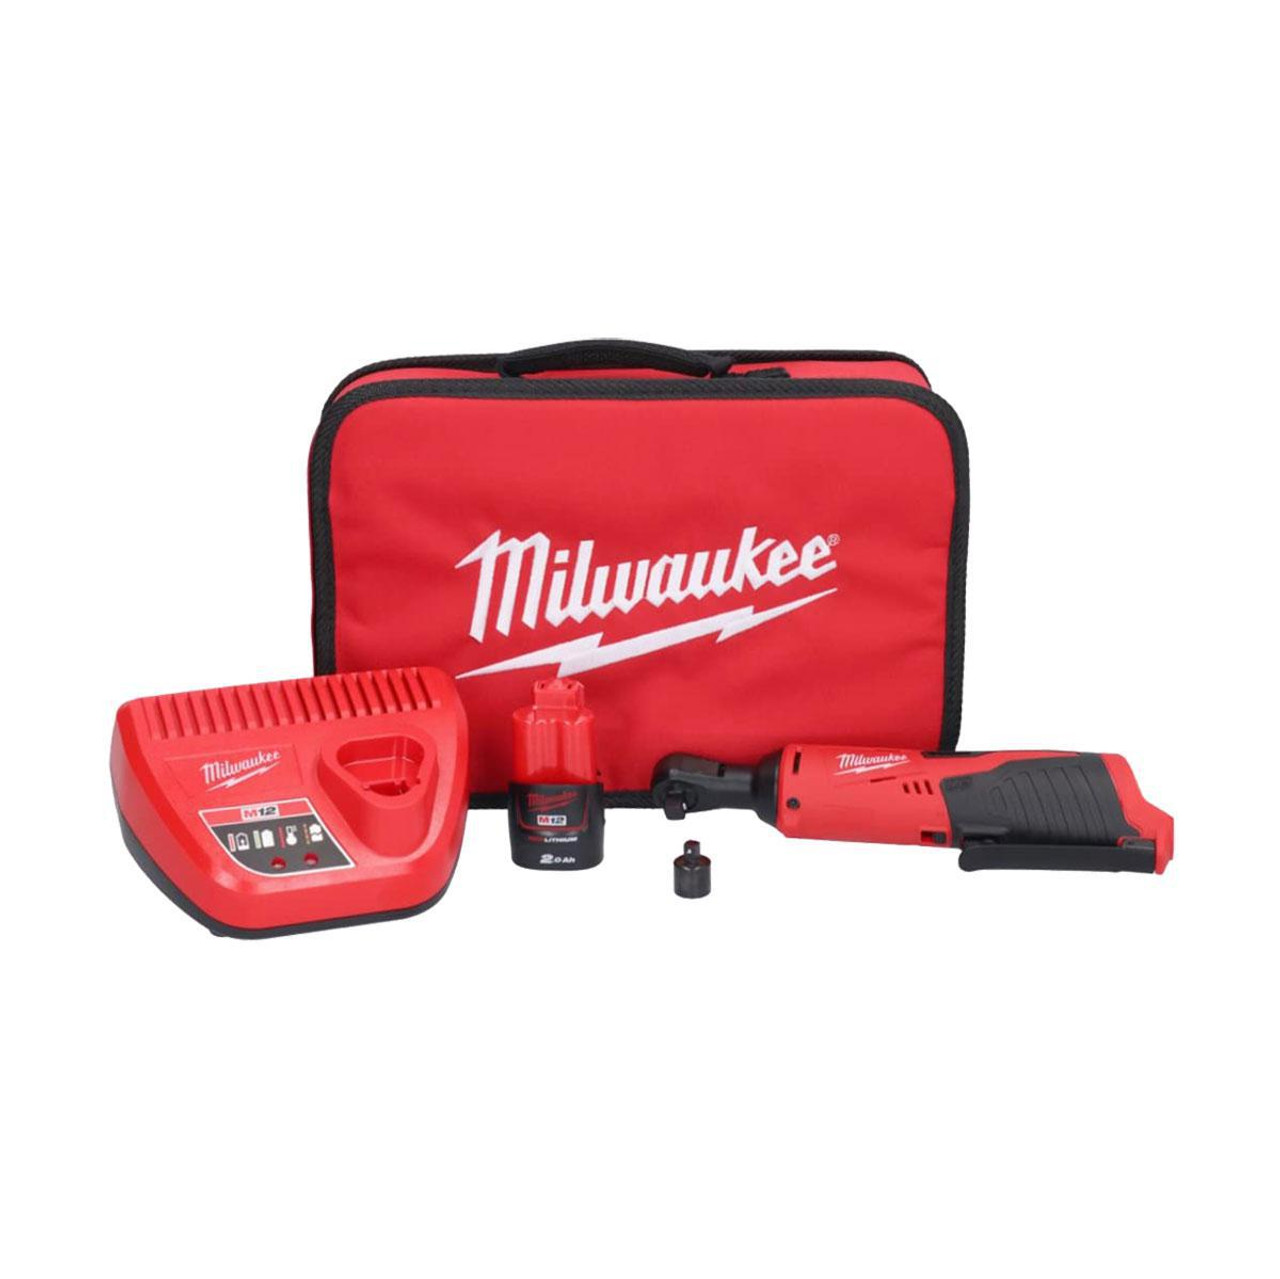 Milwaukee 12V 3/8in Angled Impact Ratchet & 1/4in Adapter - M12IR38-201B